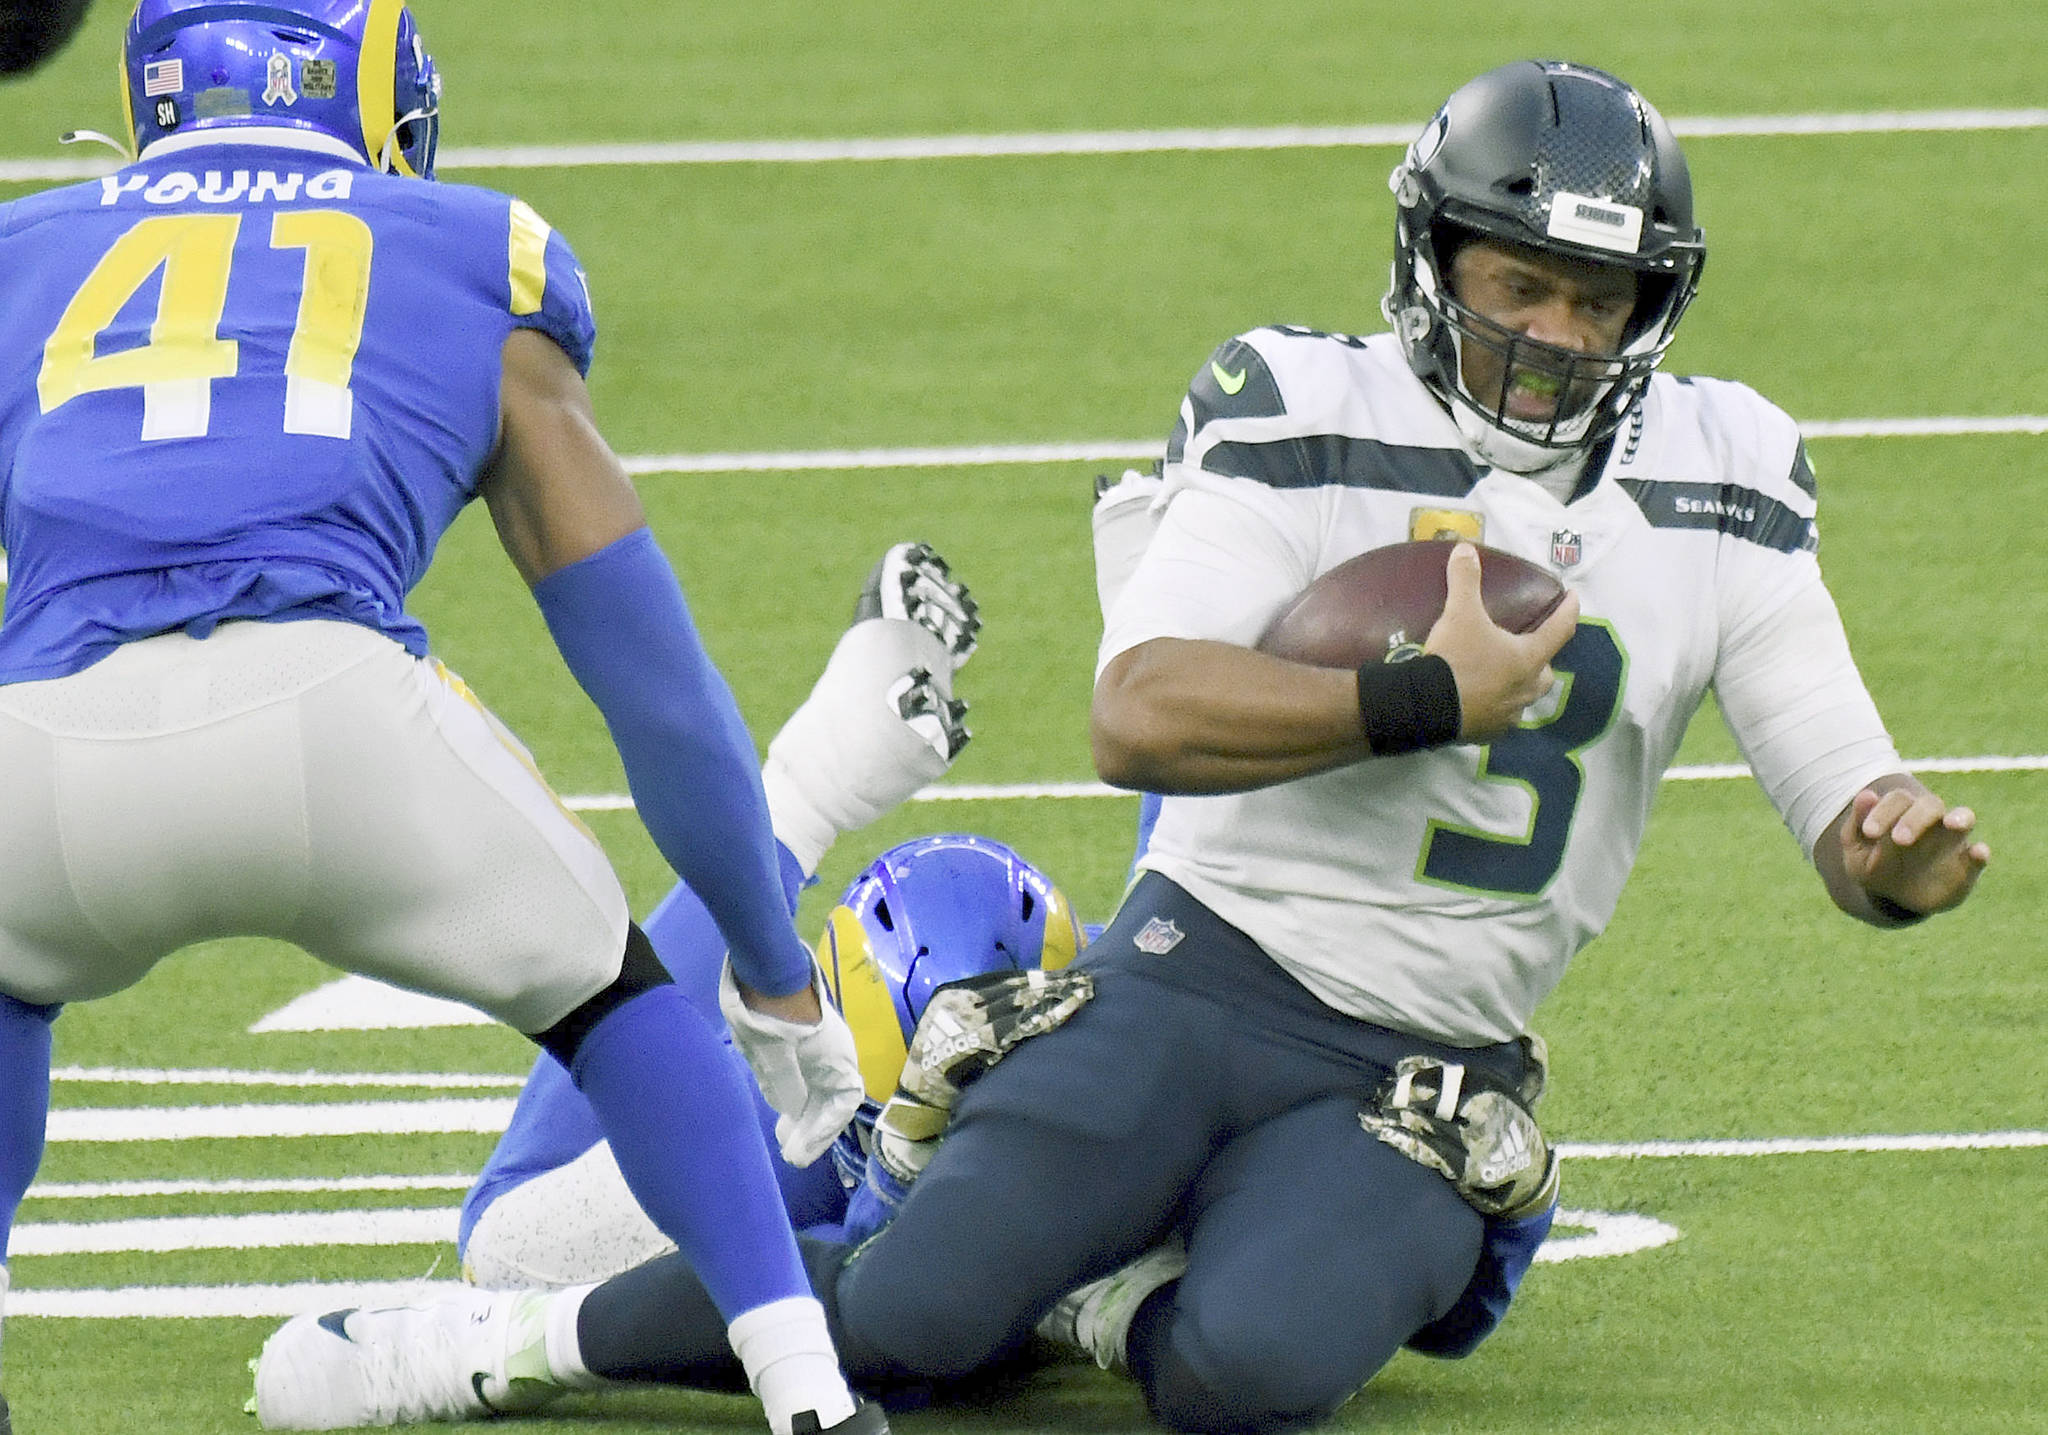 Seattle Seahawks quarterback Russell Wilson (3) scrambles against the Los Angeles Rams in the fourth quarter of an NFL football game in Inglewood, Calif., Sunday, Nov. 15, 2020. (Keith Birmingham/The Orange County Register via AP)